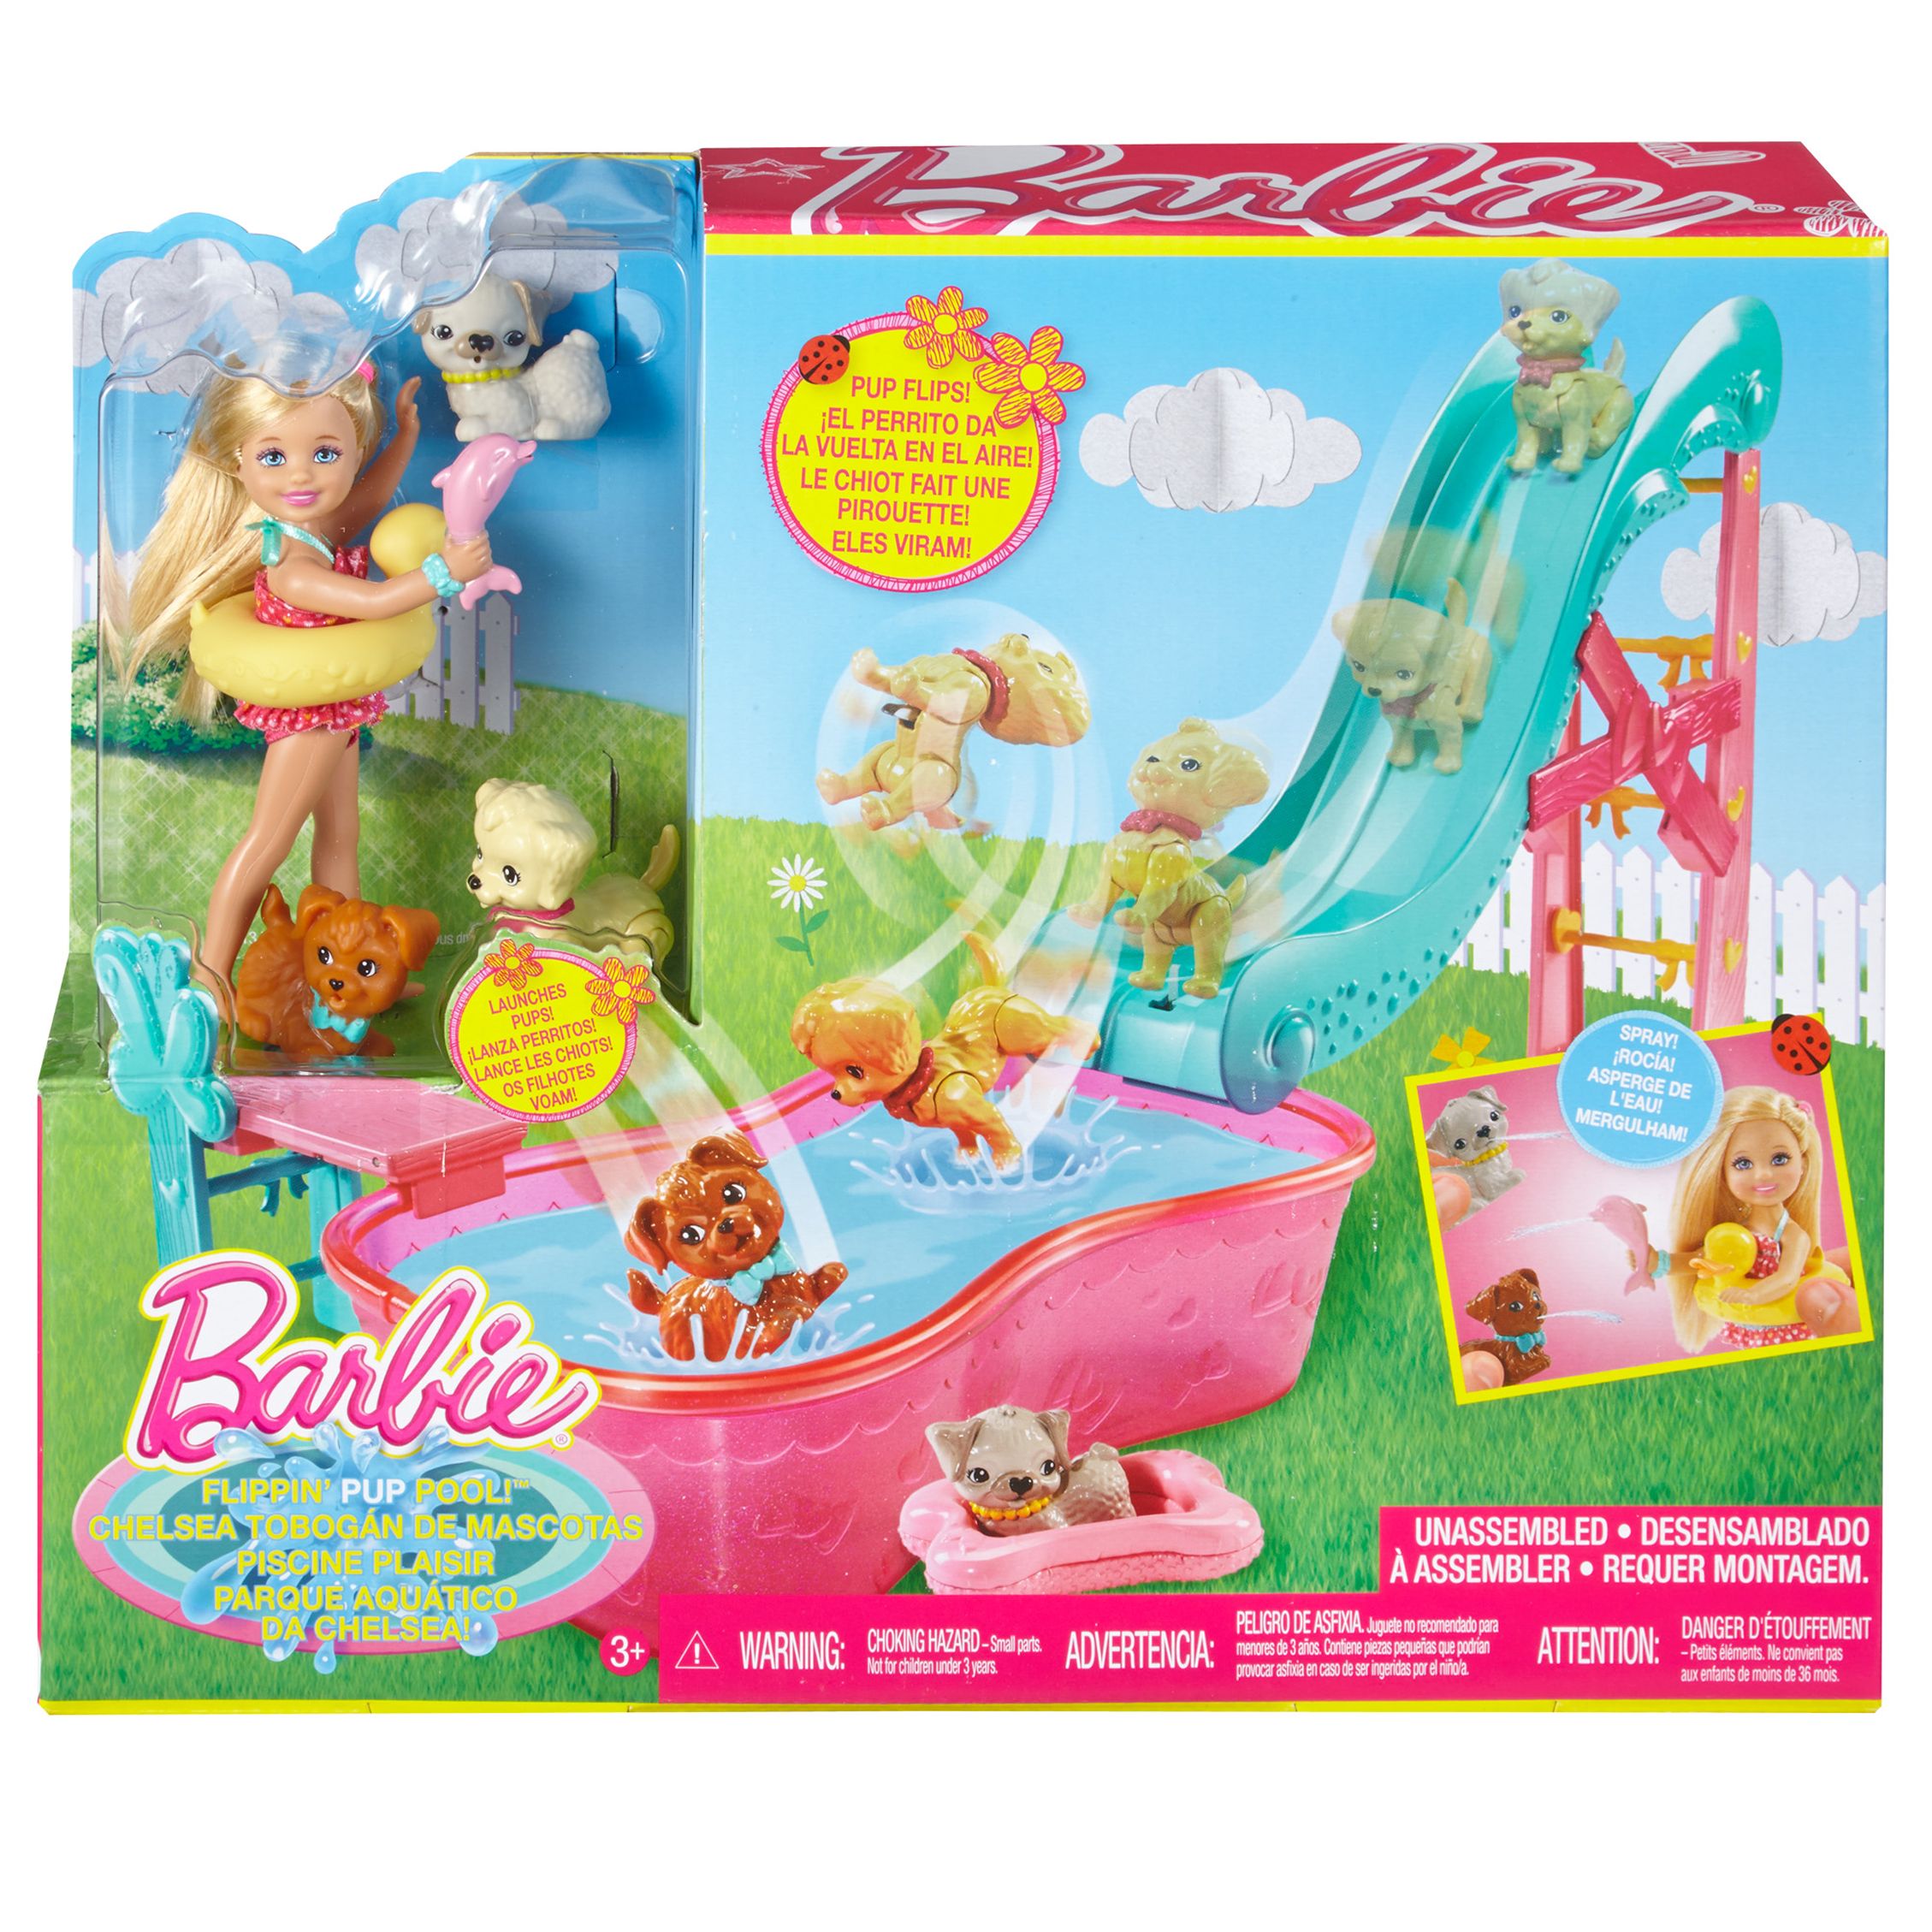 2 Barbie Doll Boat Pool Play set #4 with Puppy, Chelsea, Accessories, bath  fun